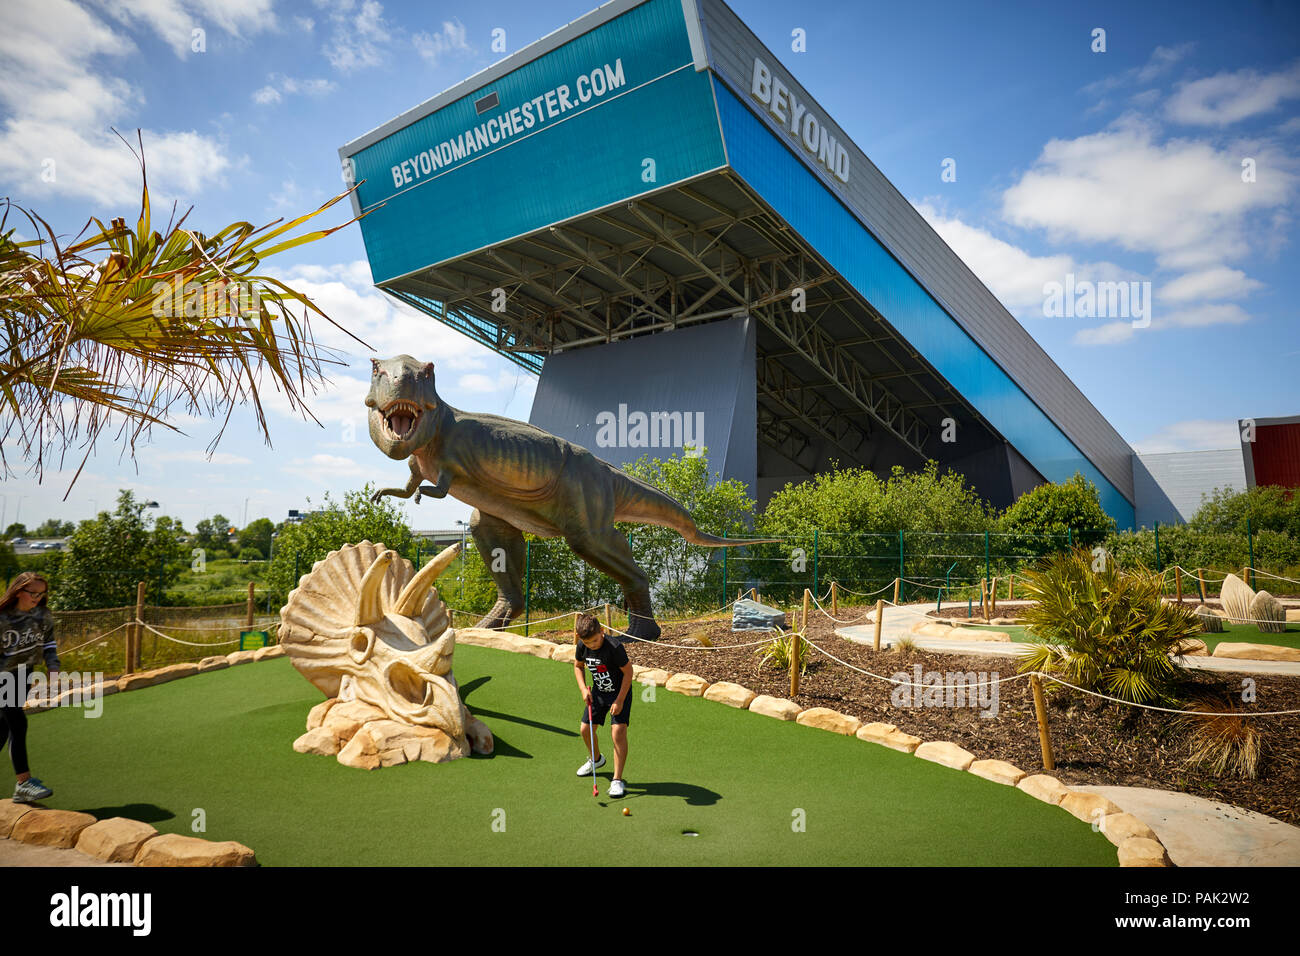 Trafford Golf Centre High Resolution Stock Photography and Images - Alamy